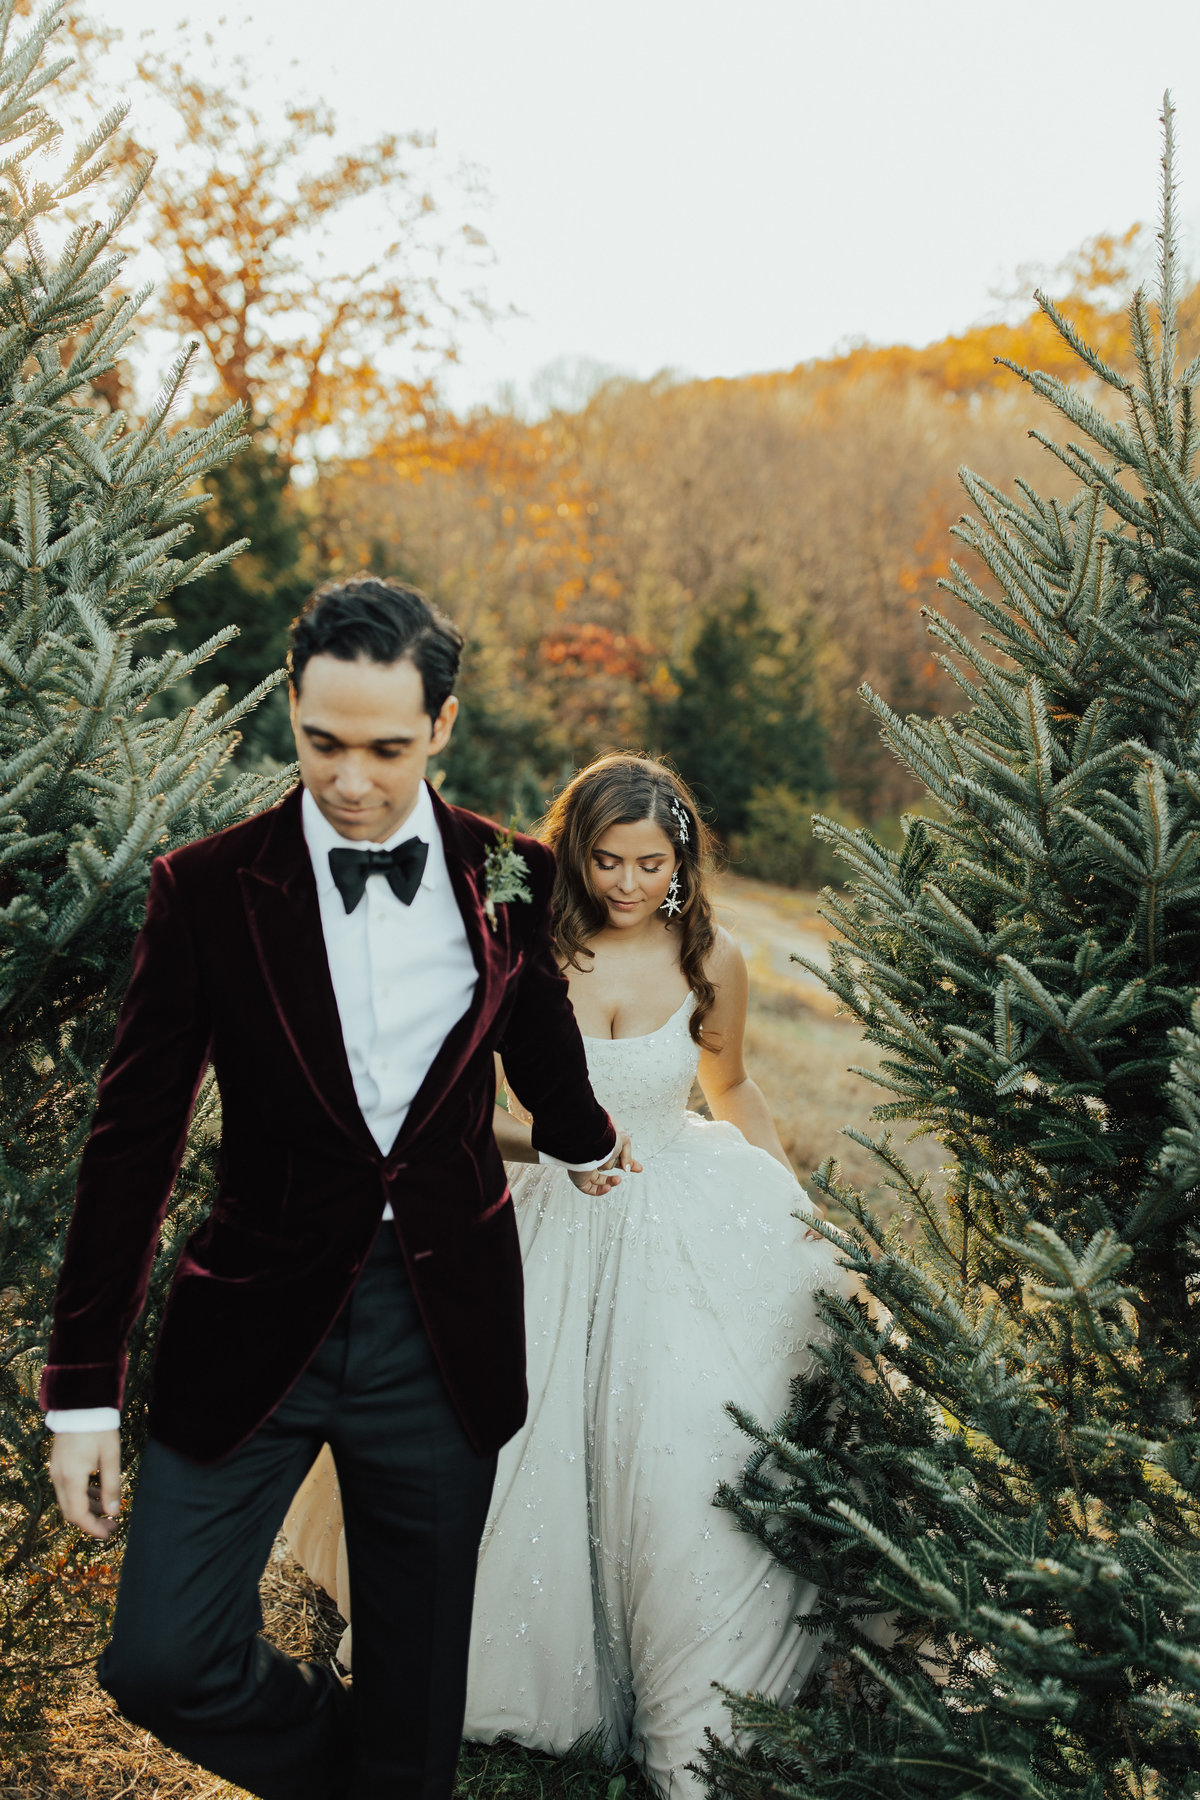 Christy-l-Johnston-Photography-Monica-Relyea-Events-Noelle-Downing-Instagram-Noelle_s-Favorite-Day-Wedding-Battenfelds-Christmas-tree-farm-Red-Hook-New-York-Hudson-Valley-upstate-november-2019-AP1A7917